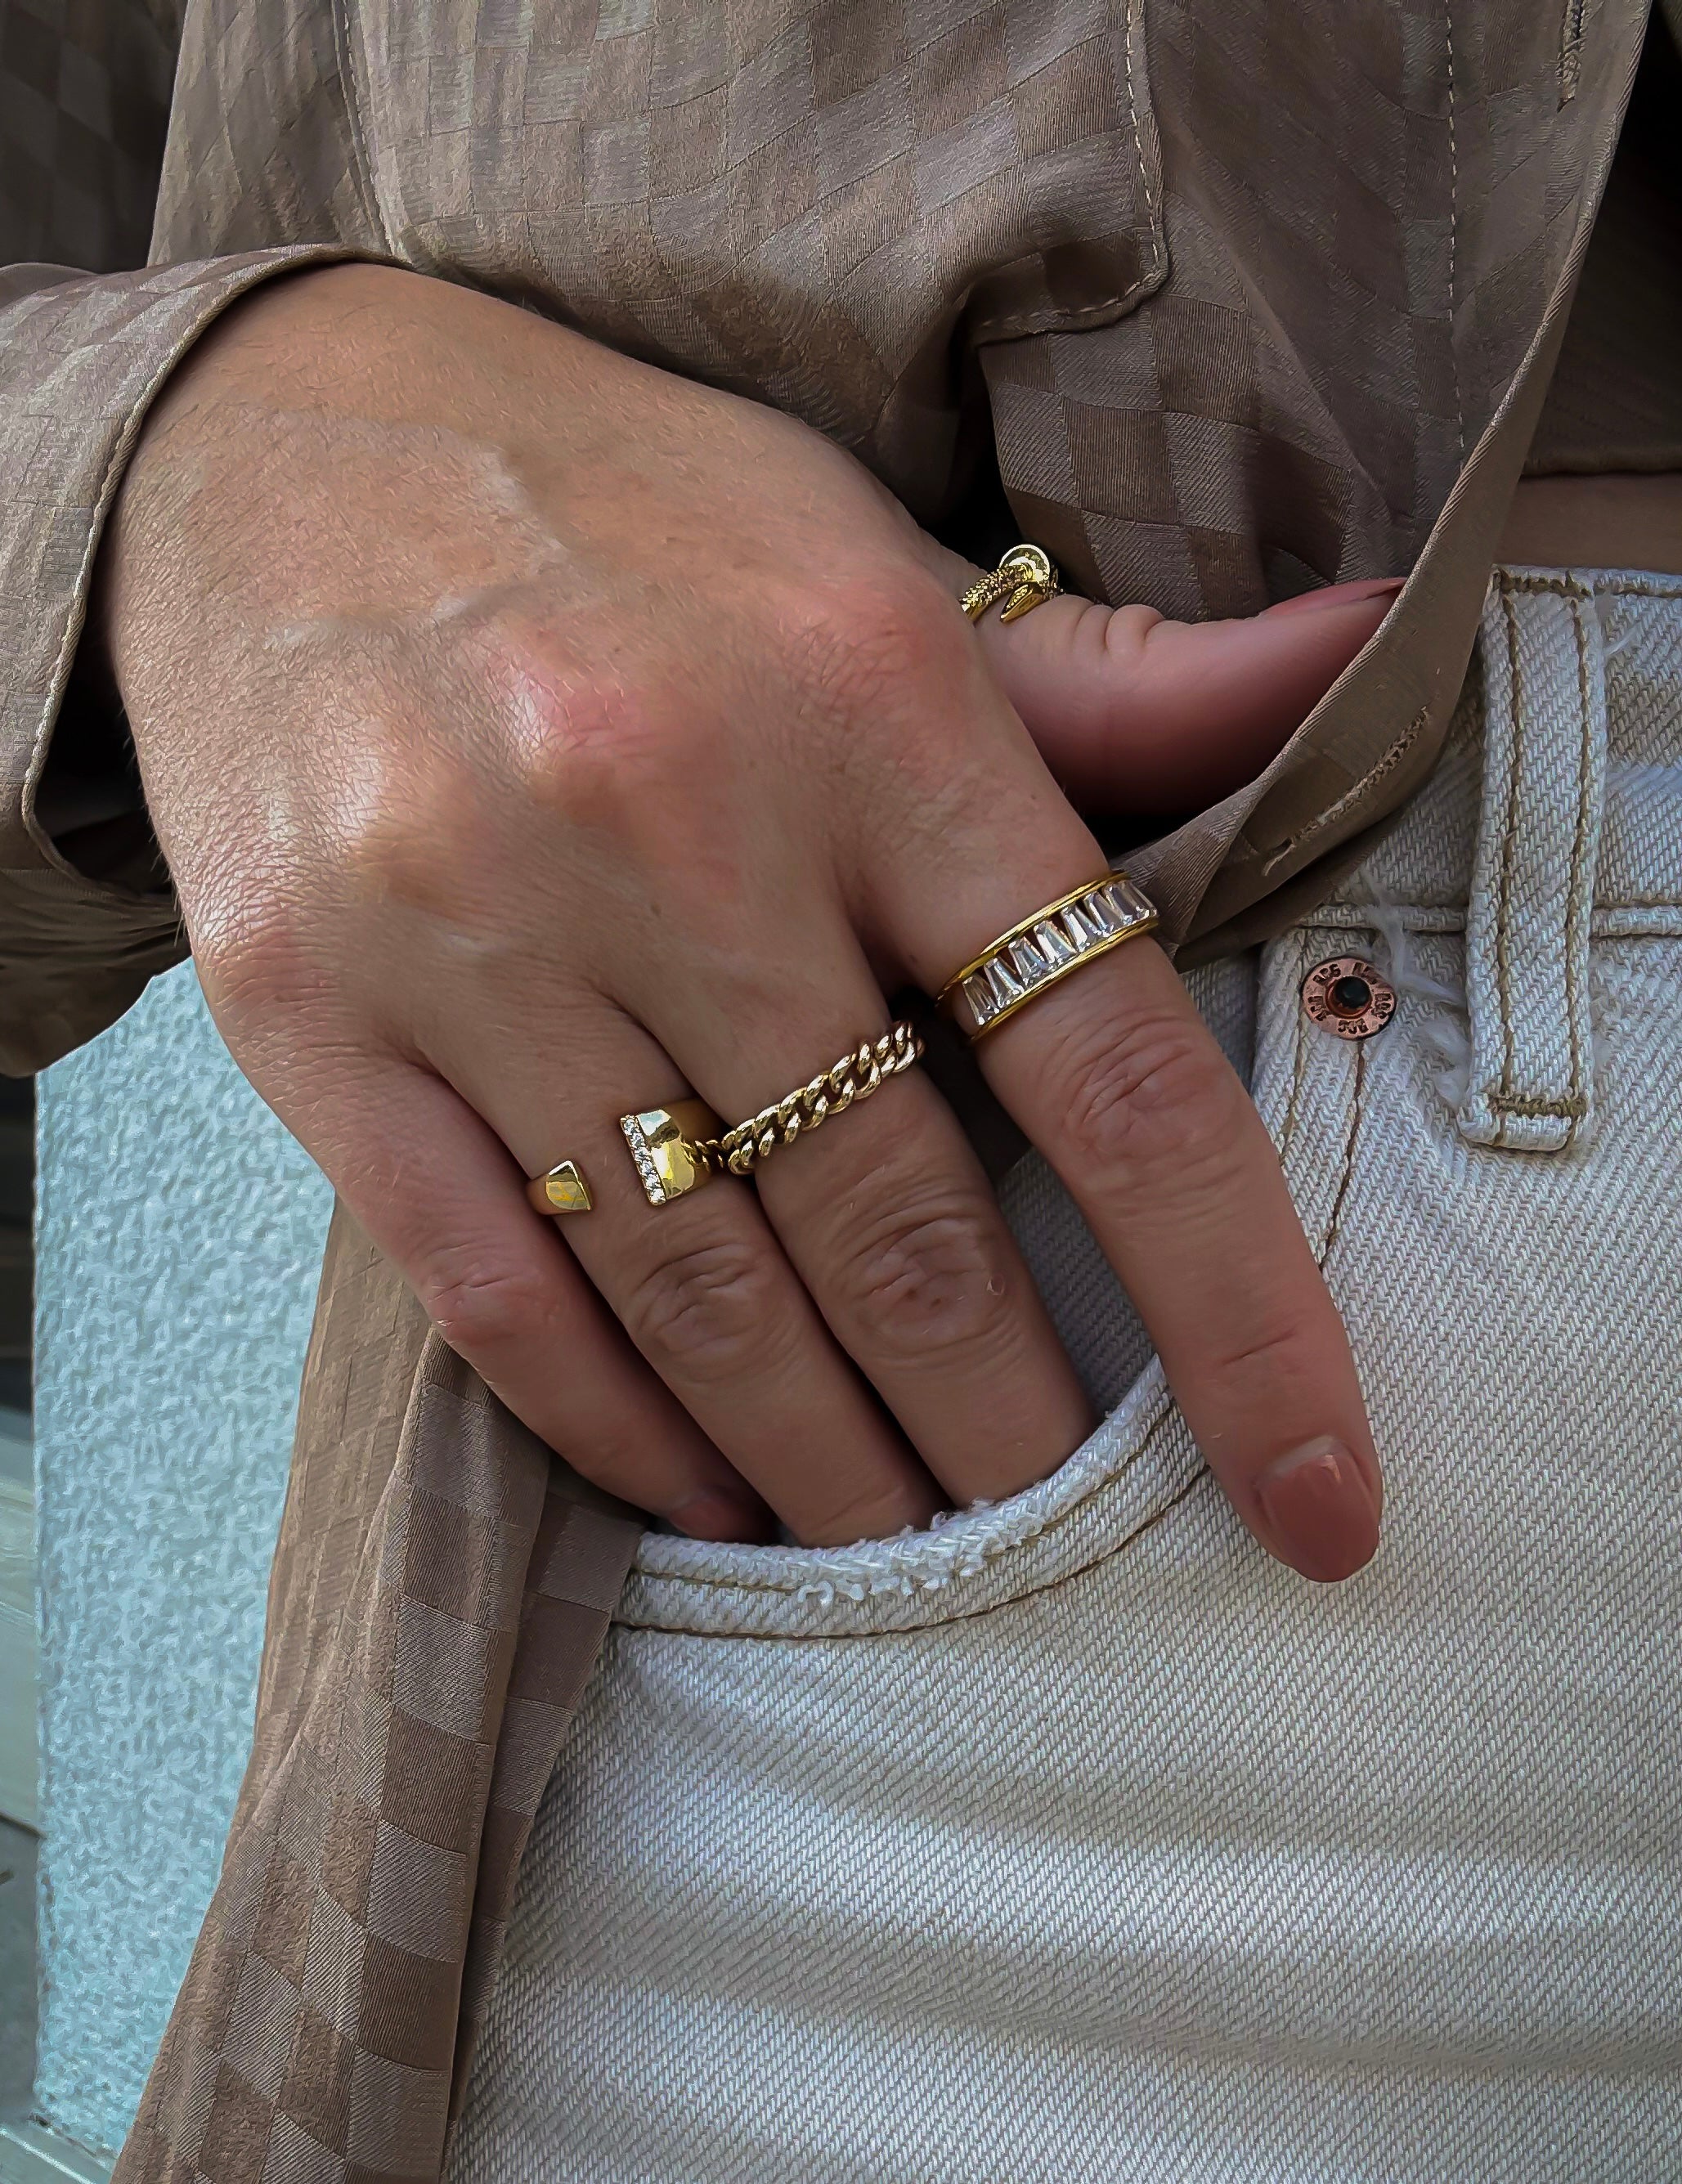 Double Band Baguette Ring